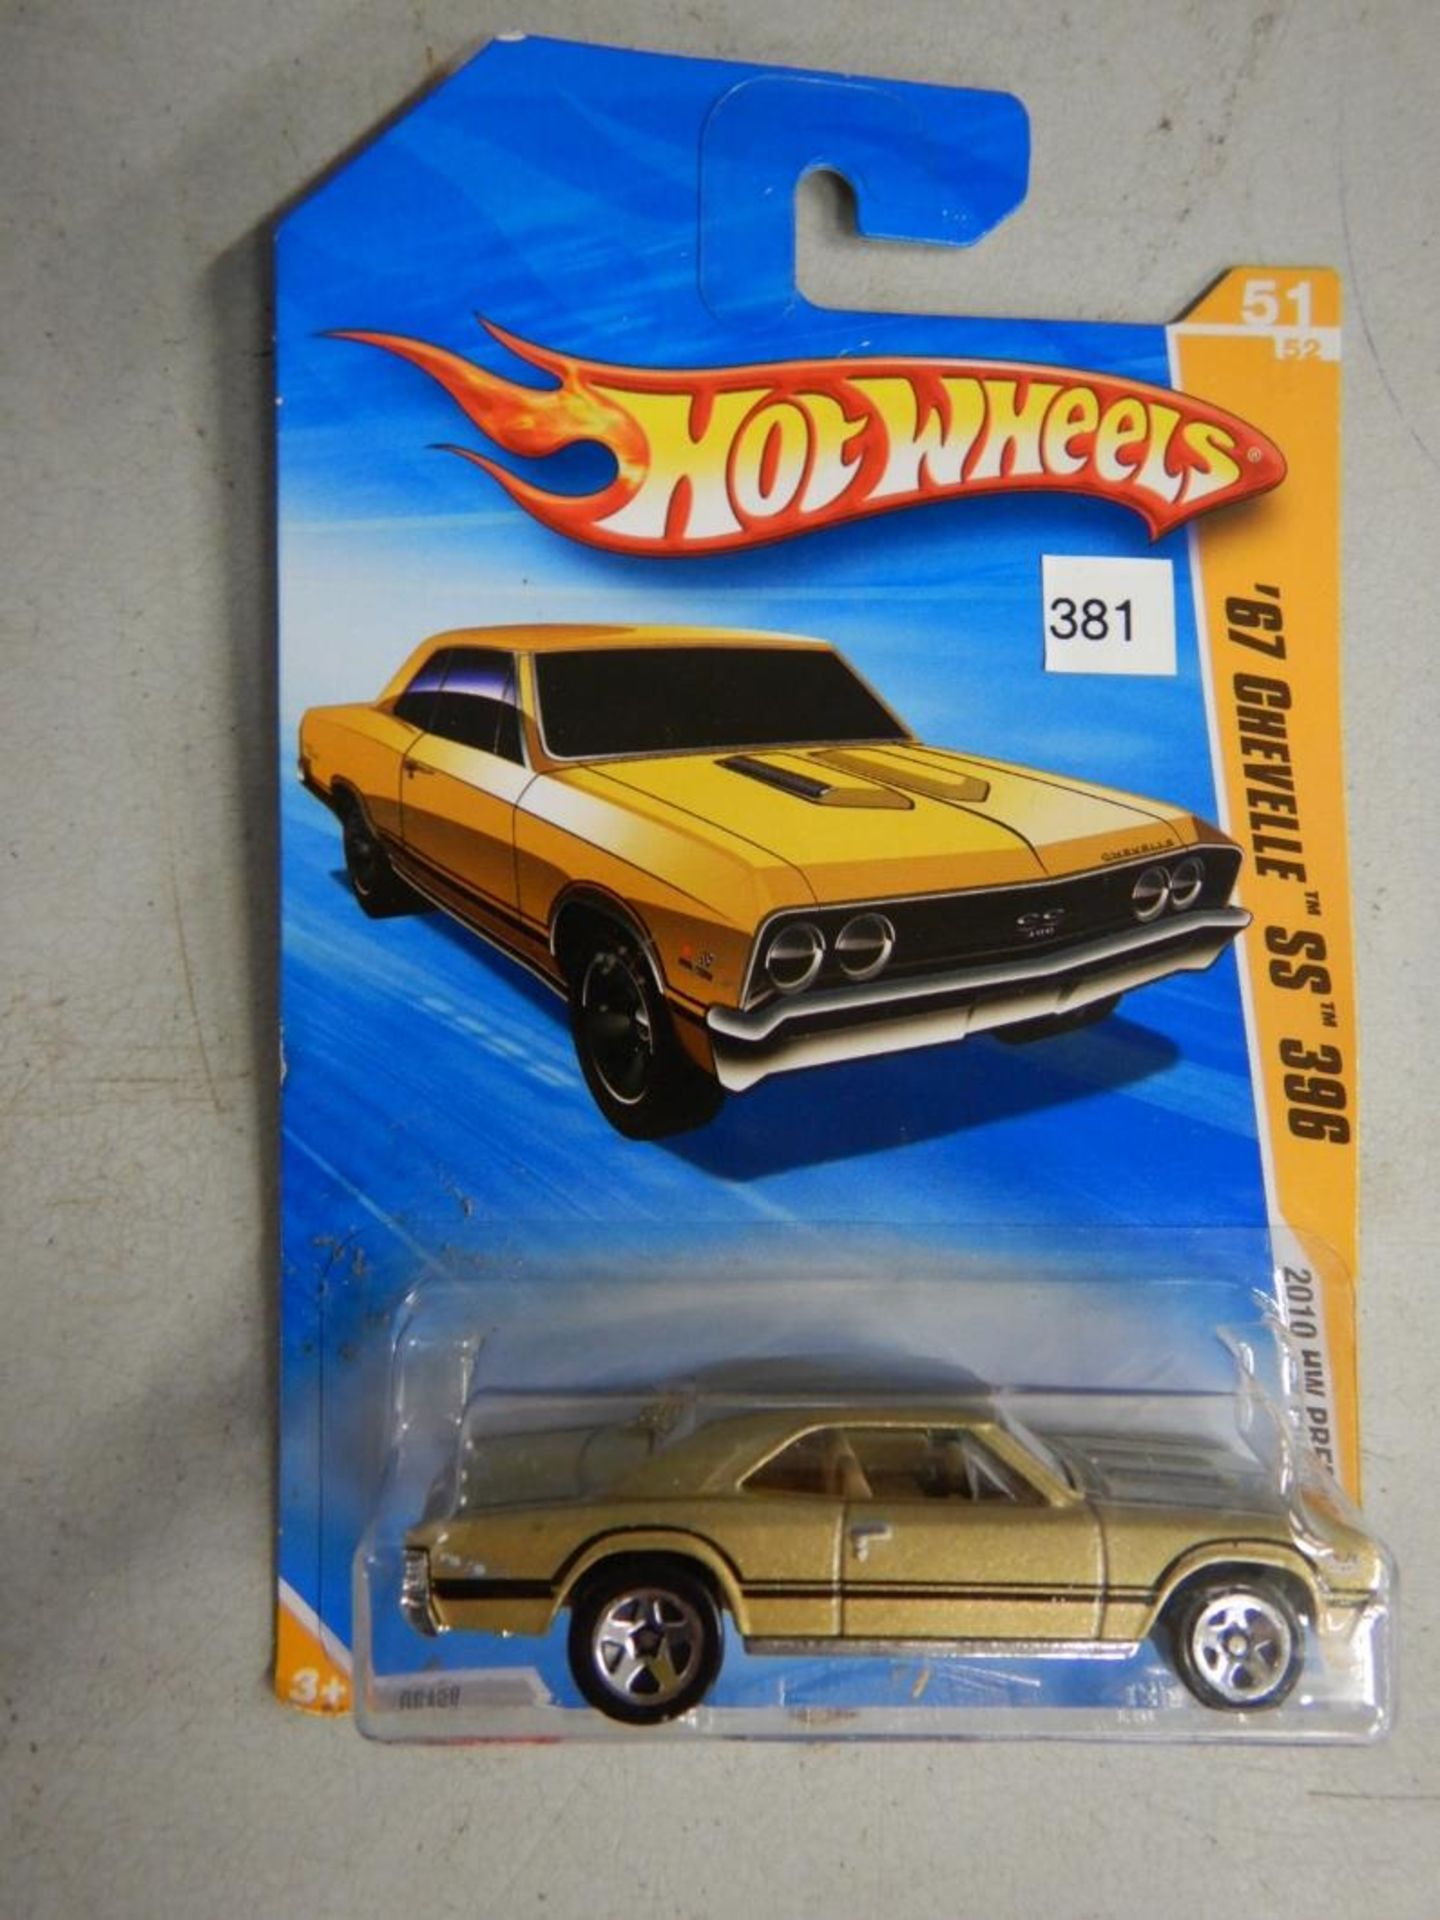 HOT WHEELS CARS - "67 CHEVELLE SS 396", "MERCEDES SL 64", "LINCOLN CONTINENTAL", "40'S WOODIE", " - Image 3 of 6